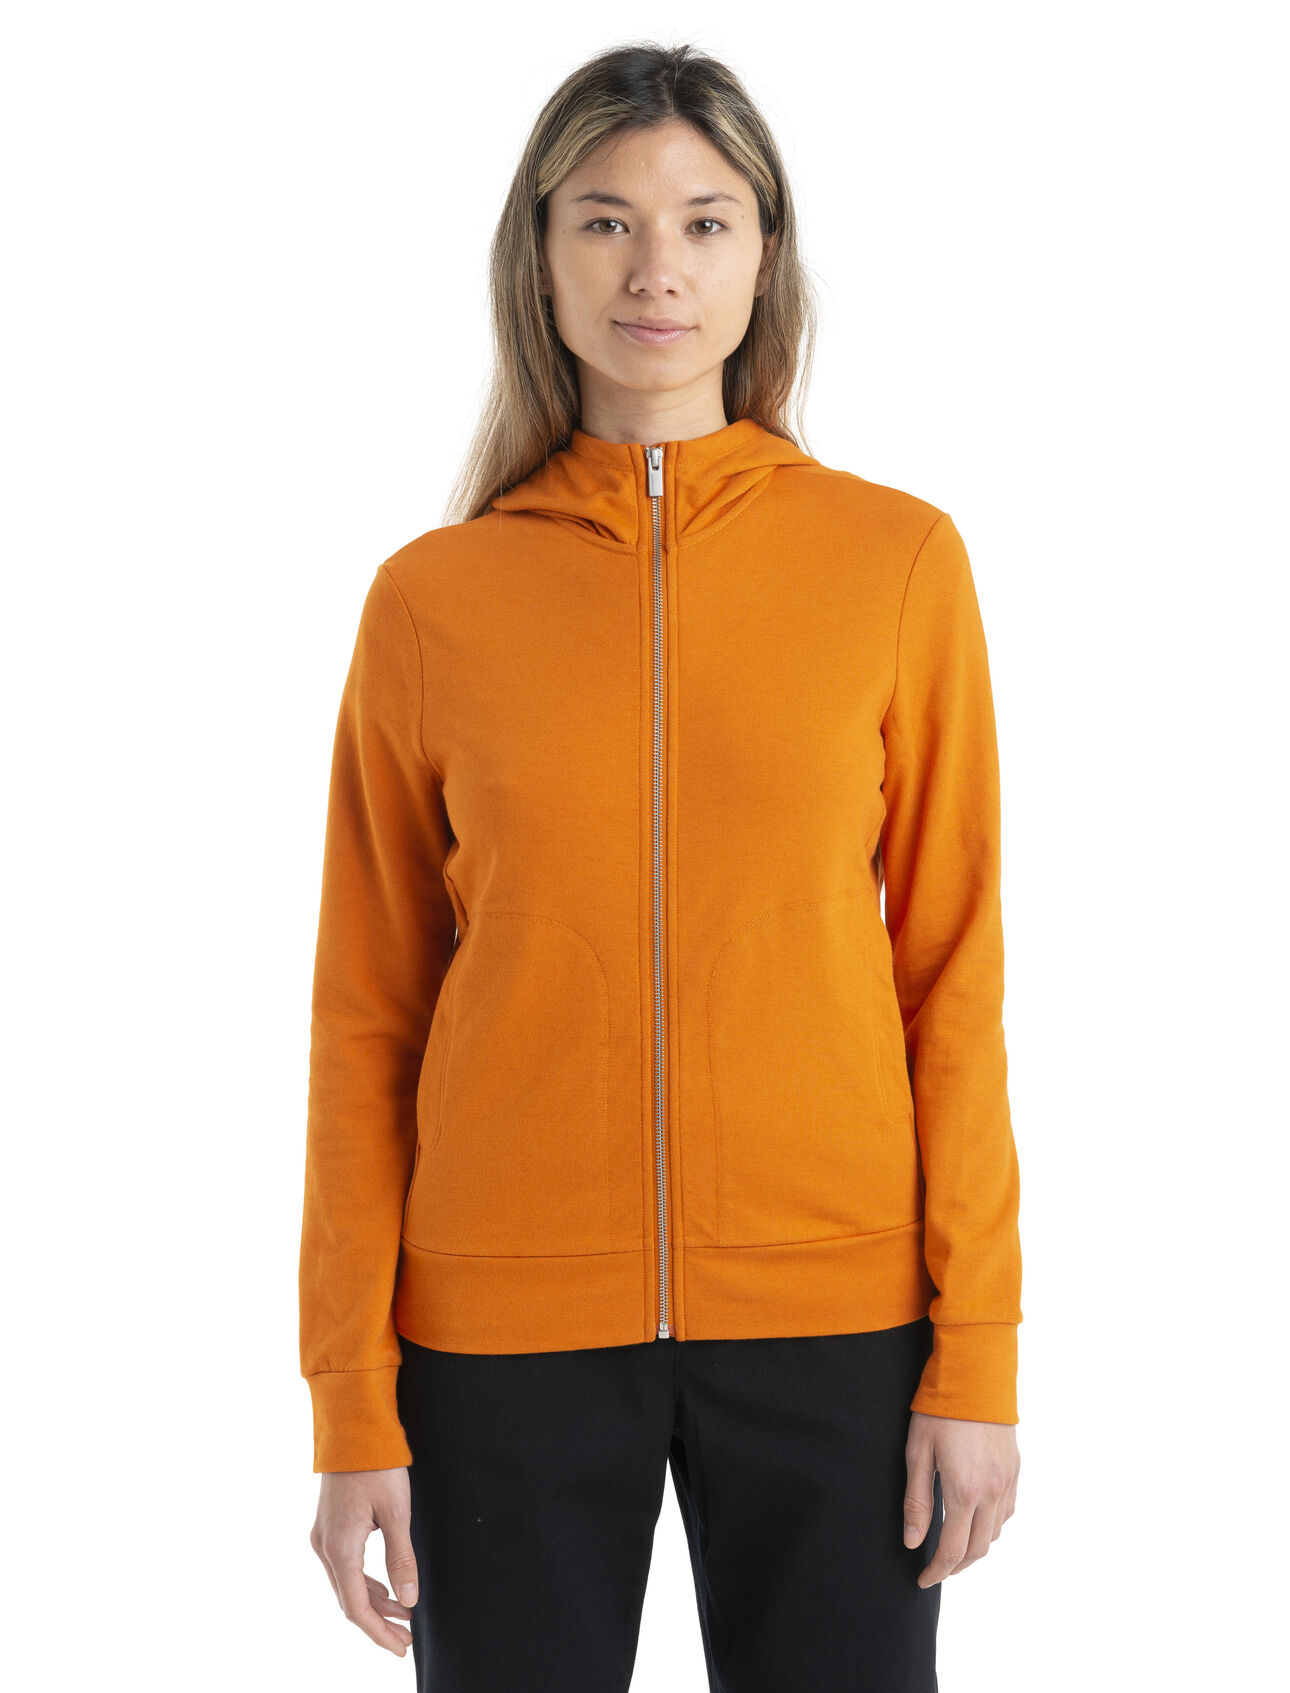 Womens Merino Cotton Central Classic Long Sleeve Zip Hoodie A comfy, classic and stylish everyday hooded sweatshirt that blends natural merino wool with organically grown cotton, the Central Classic Long Sleeve Zip Hoodie is durable, breathable and incredibly versatile.  